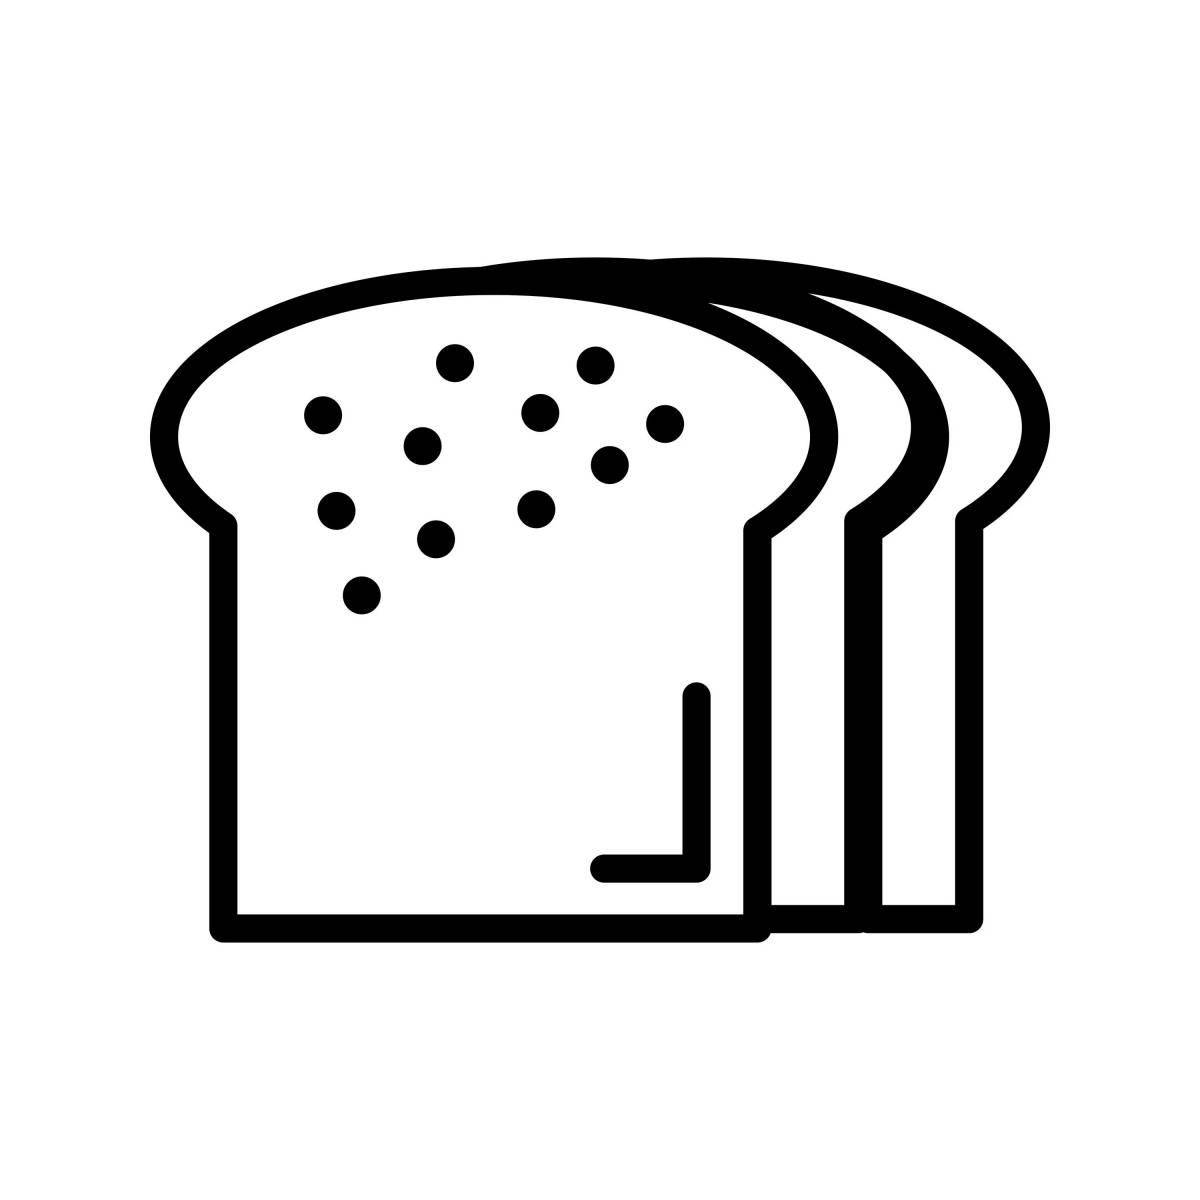 Coloring page of colorful toasts